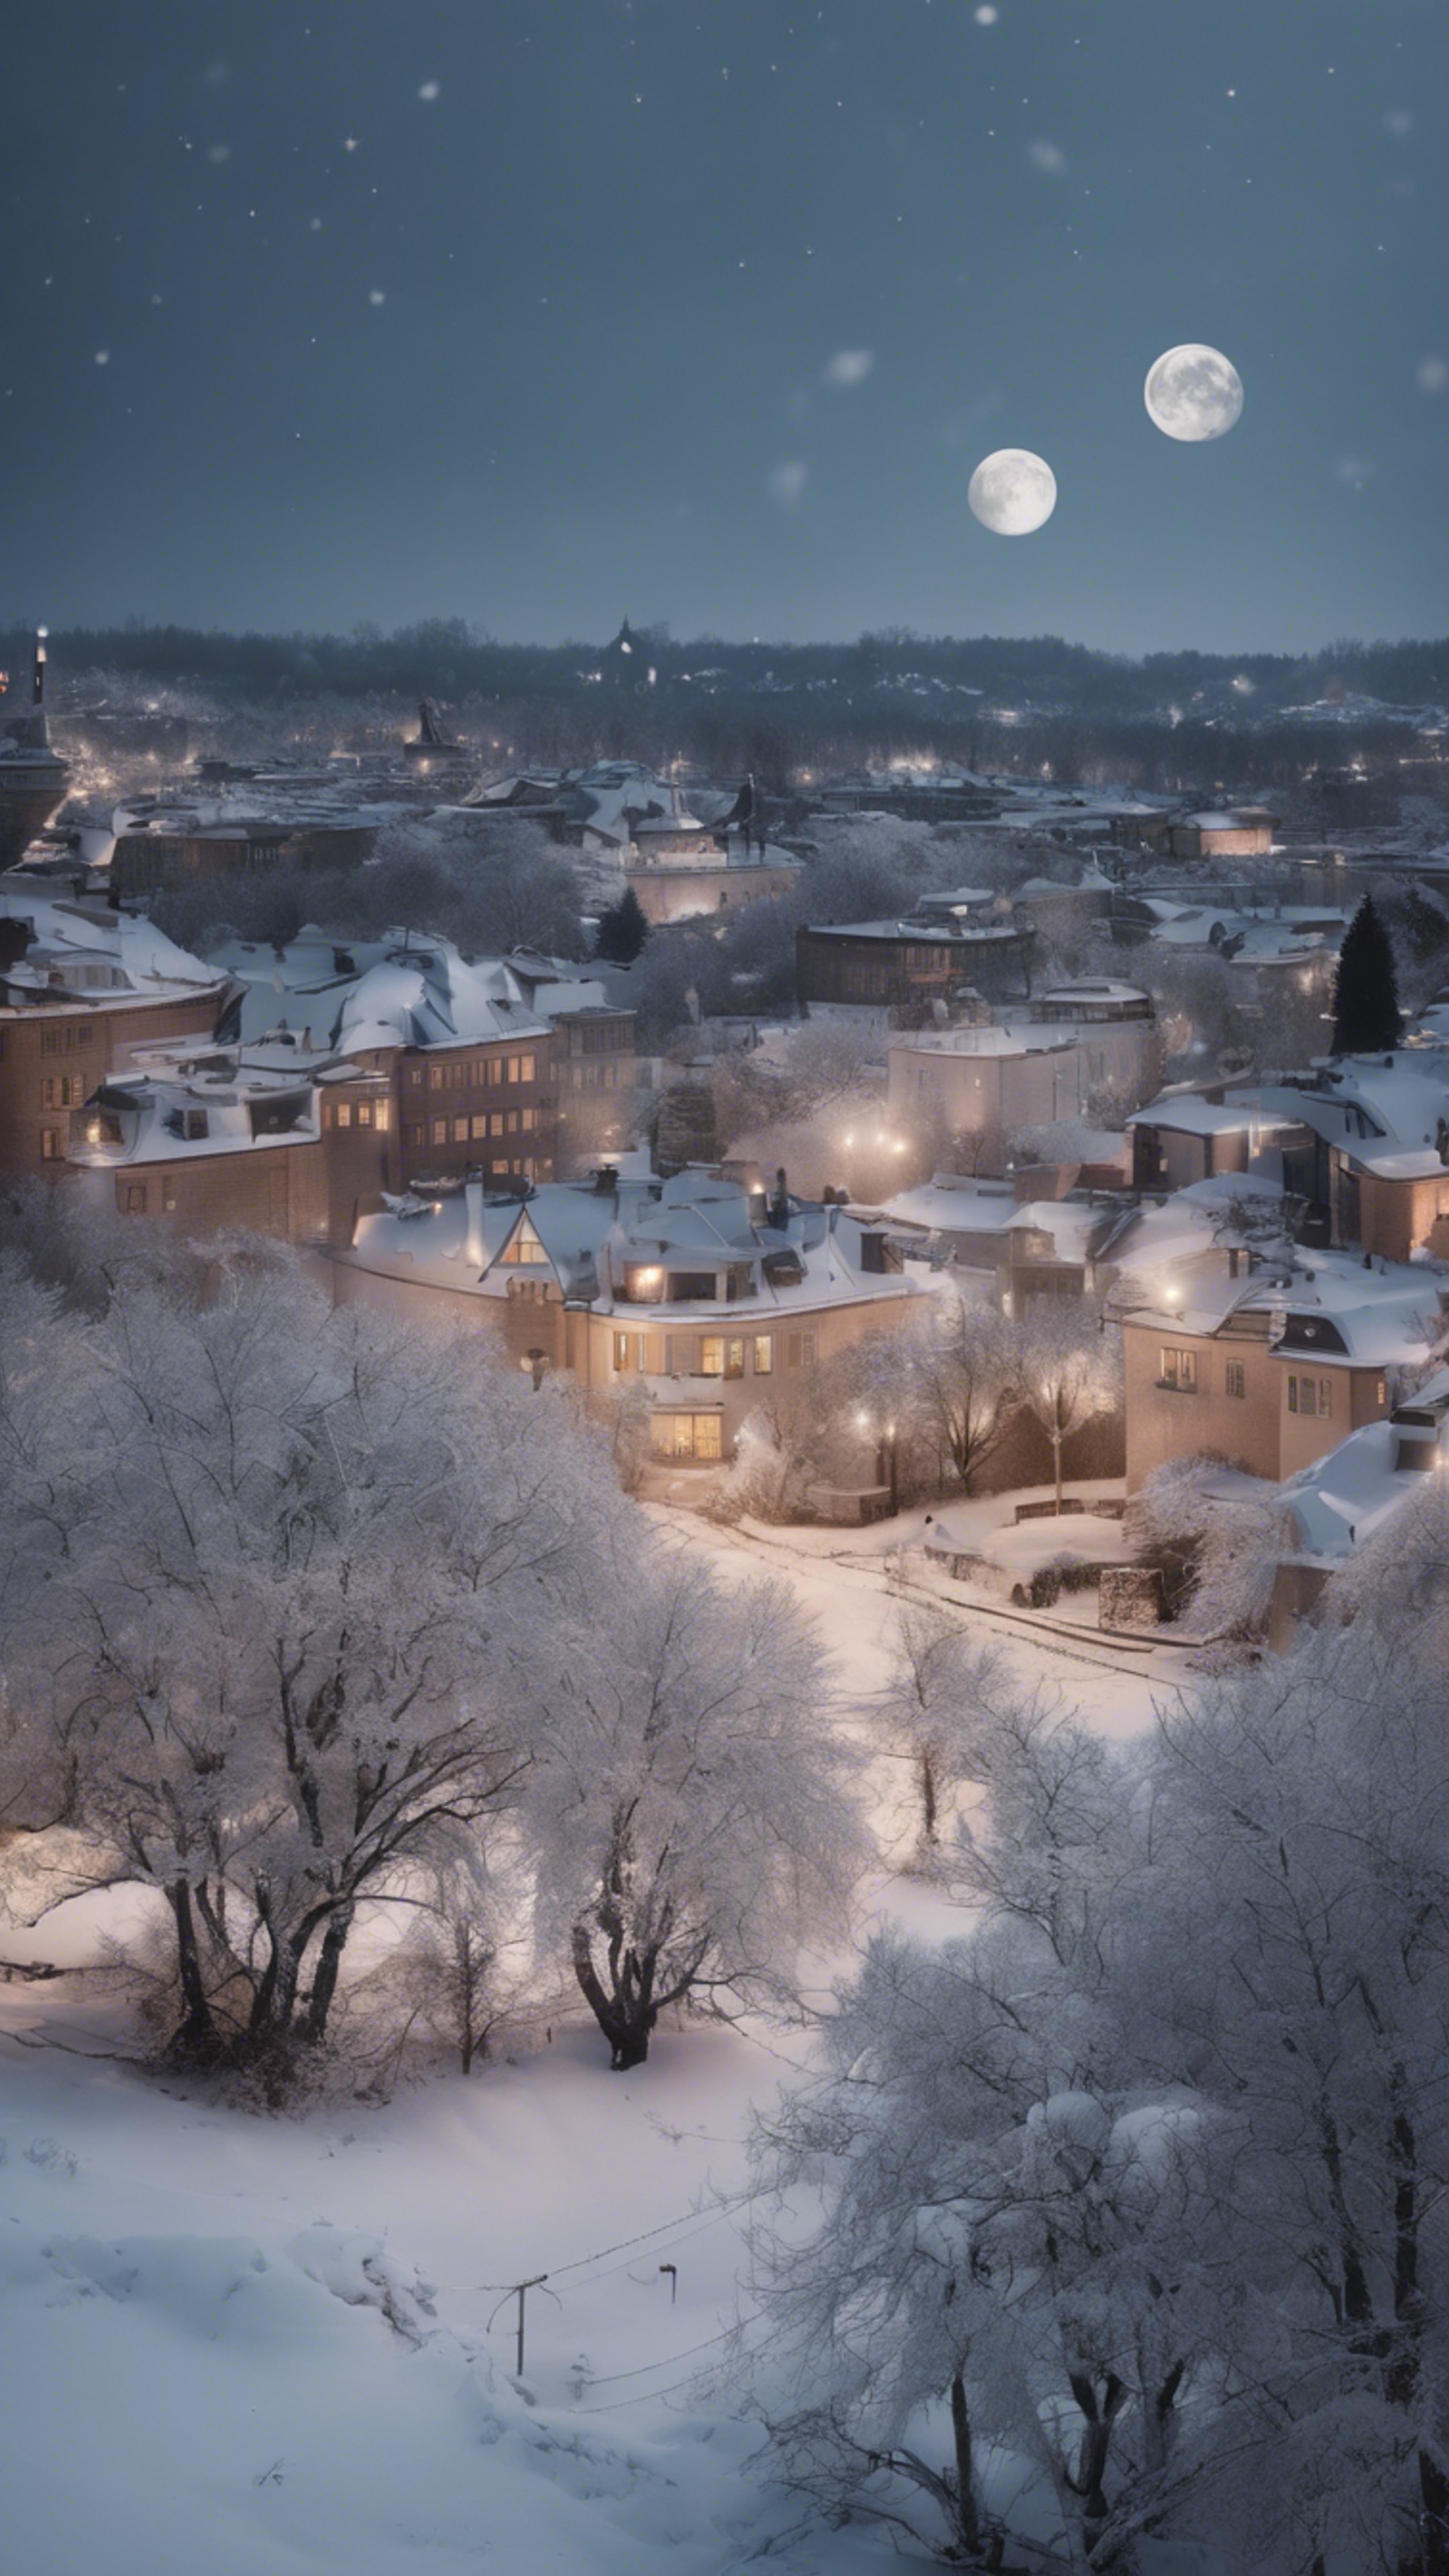 A snowy winter scene, the rooftops and trees covered by cool white snow, the moon casts a silvery glow on the serene town. Тапет[b59119720f8642b39e1c]